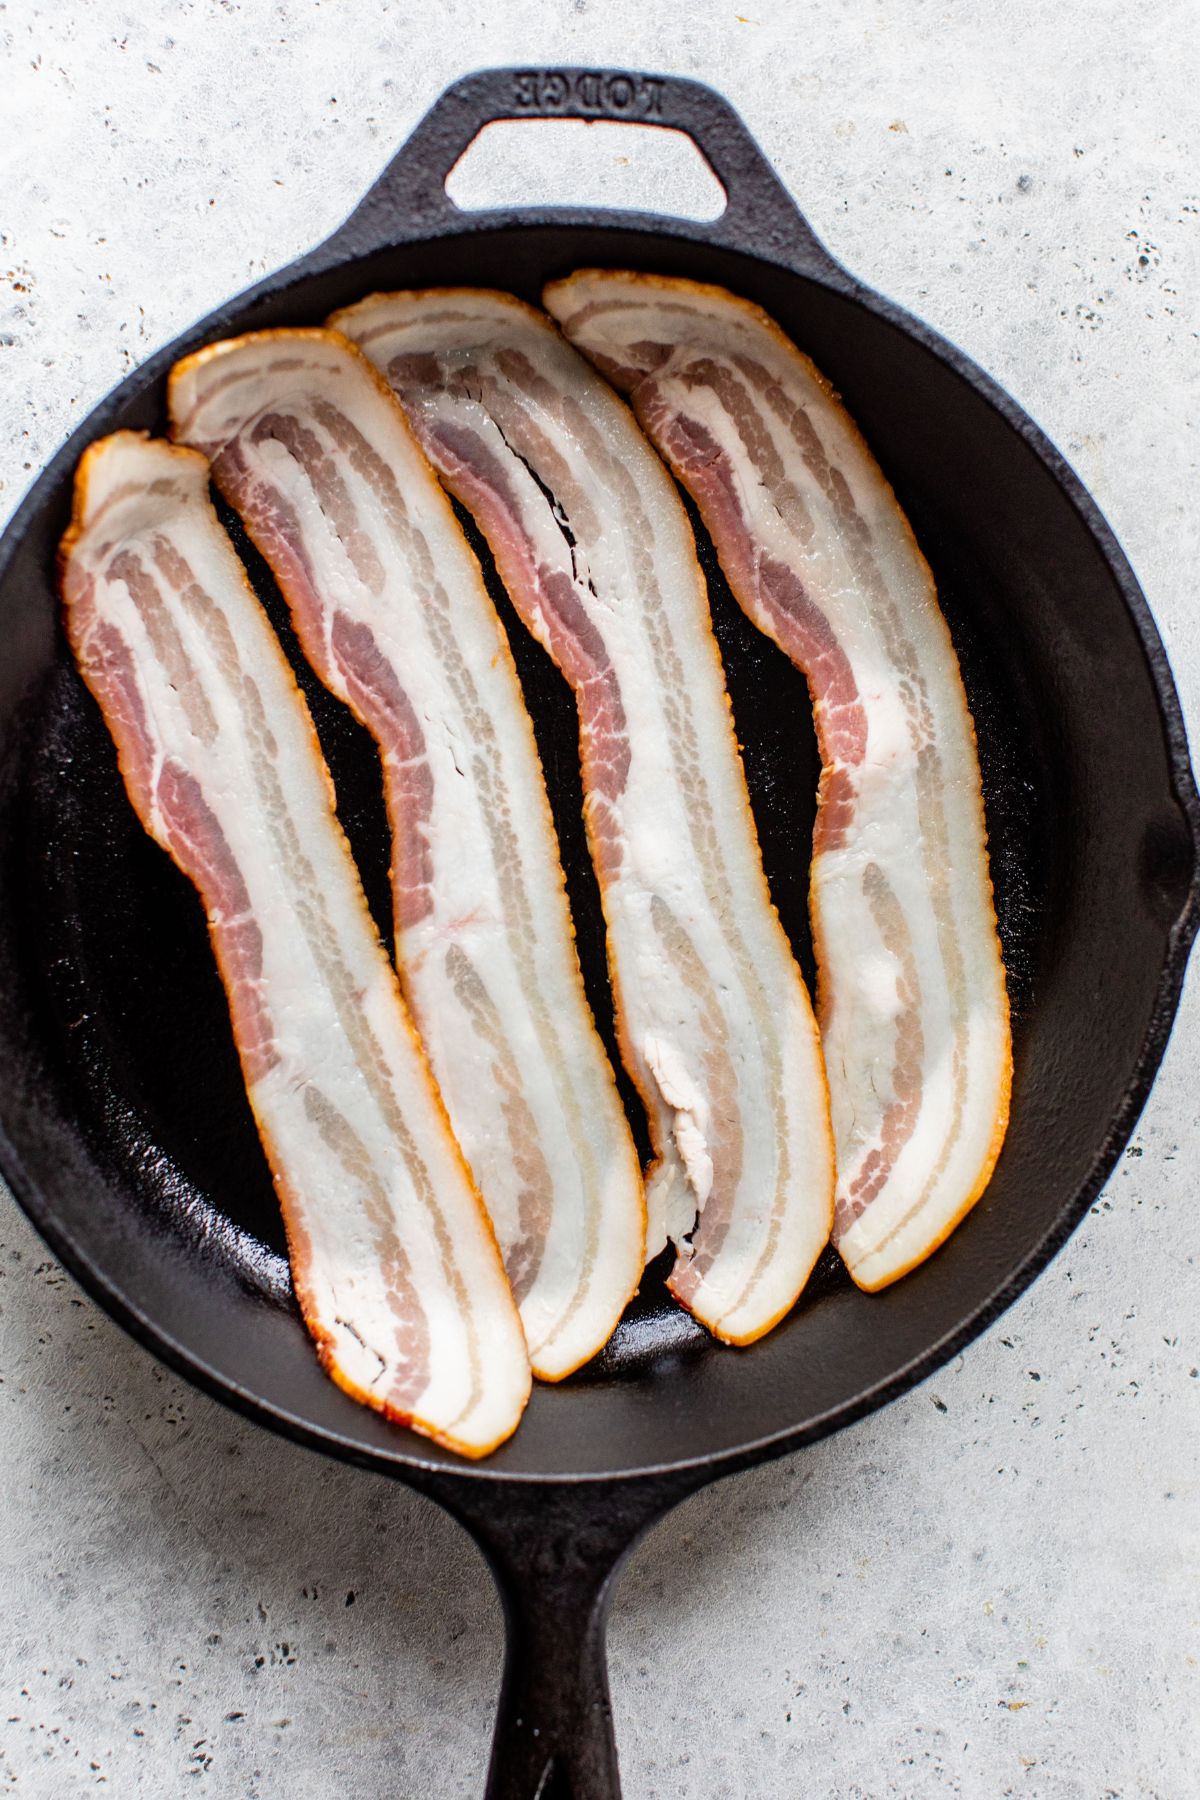 Four slices of bacon in a cast iron skillet.